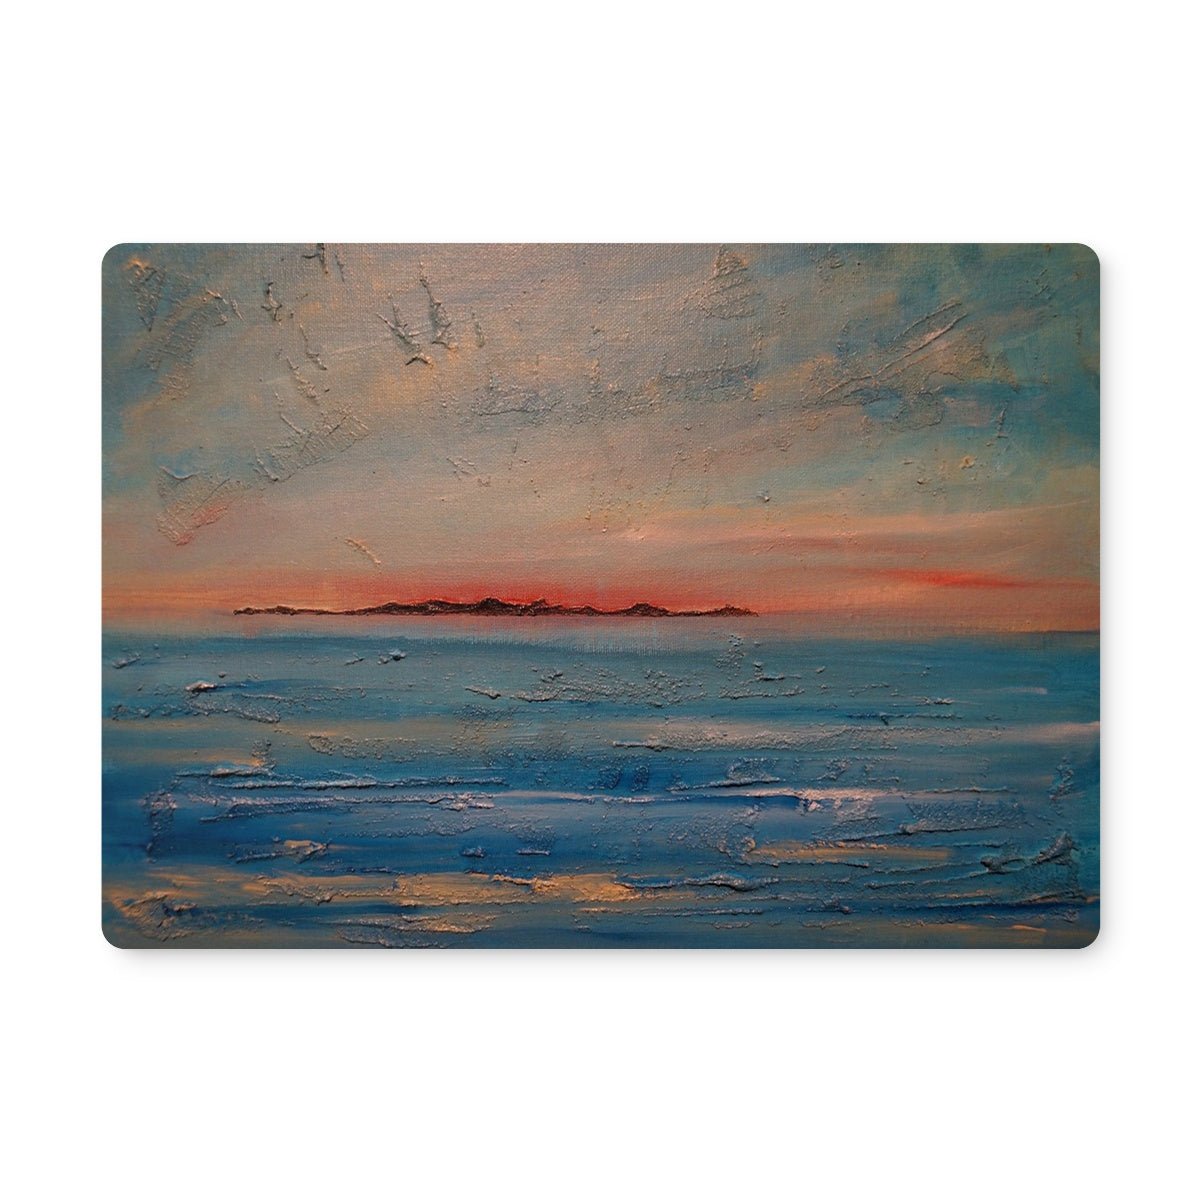 Gigha Sunset Art Gifts Placemat-Placemats-Hebridean Islands Art Gallery-Single Placemat-Paintings, Prints, Homeware, Art Gifts From Scotland By Scottish Artist Kevin Hunter